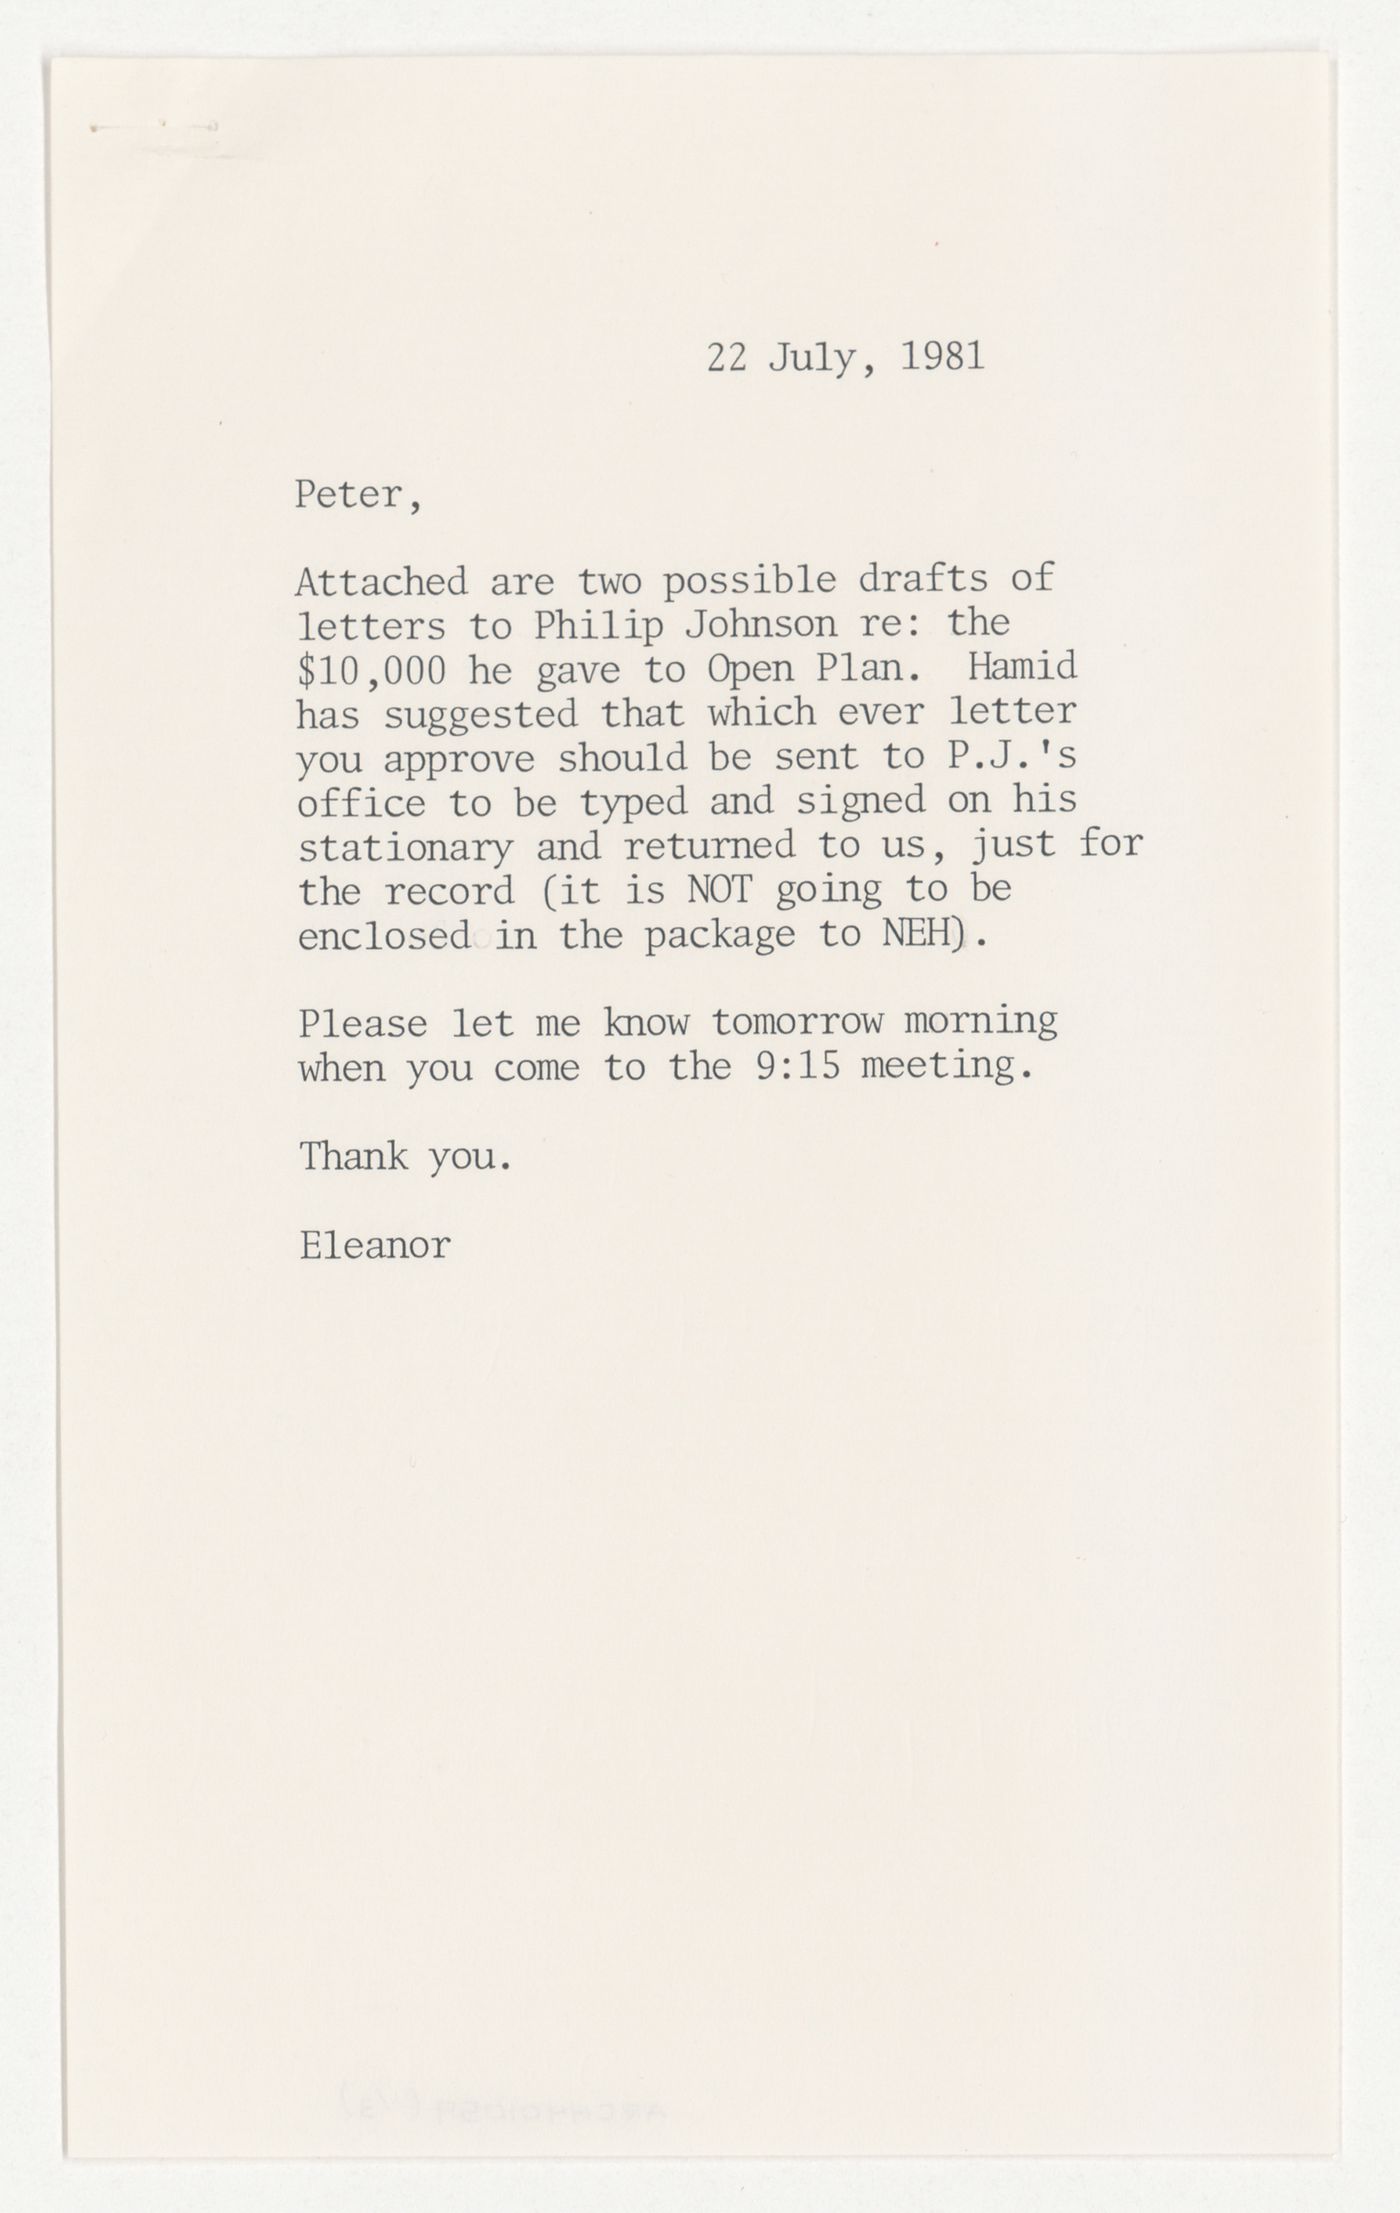 Note from Eleanor F. Earle to Peter D. Eisenman with attached draft letters from Philip Johnson to Peter D. Eisenman about a donation